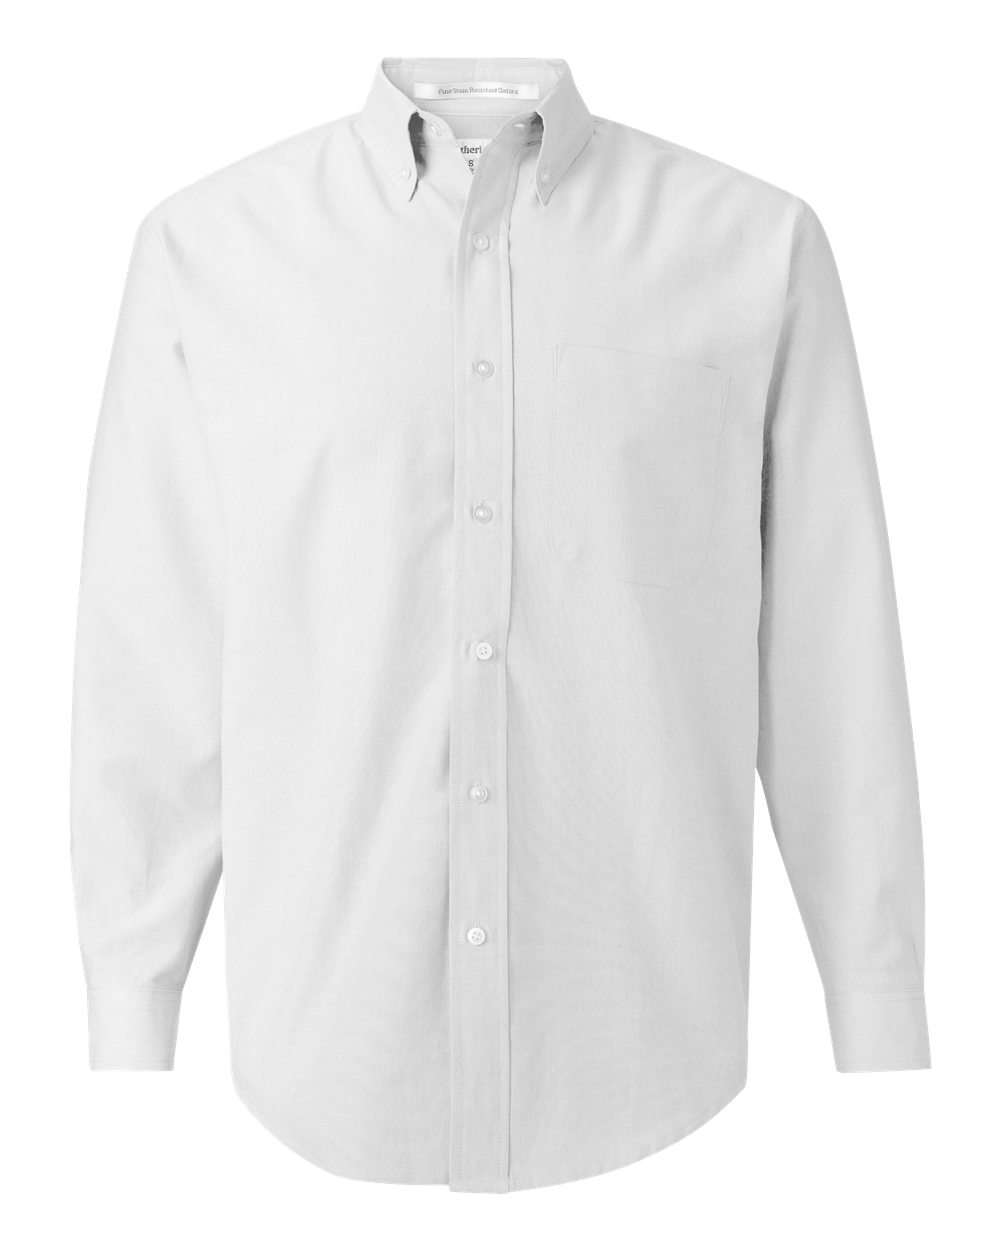 Long Sleeve Stain Resistant Oxford Shirt-FeatherLite